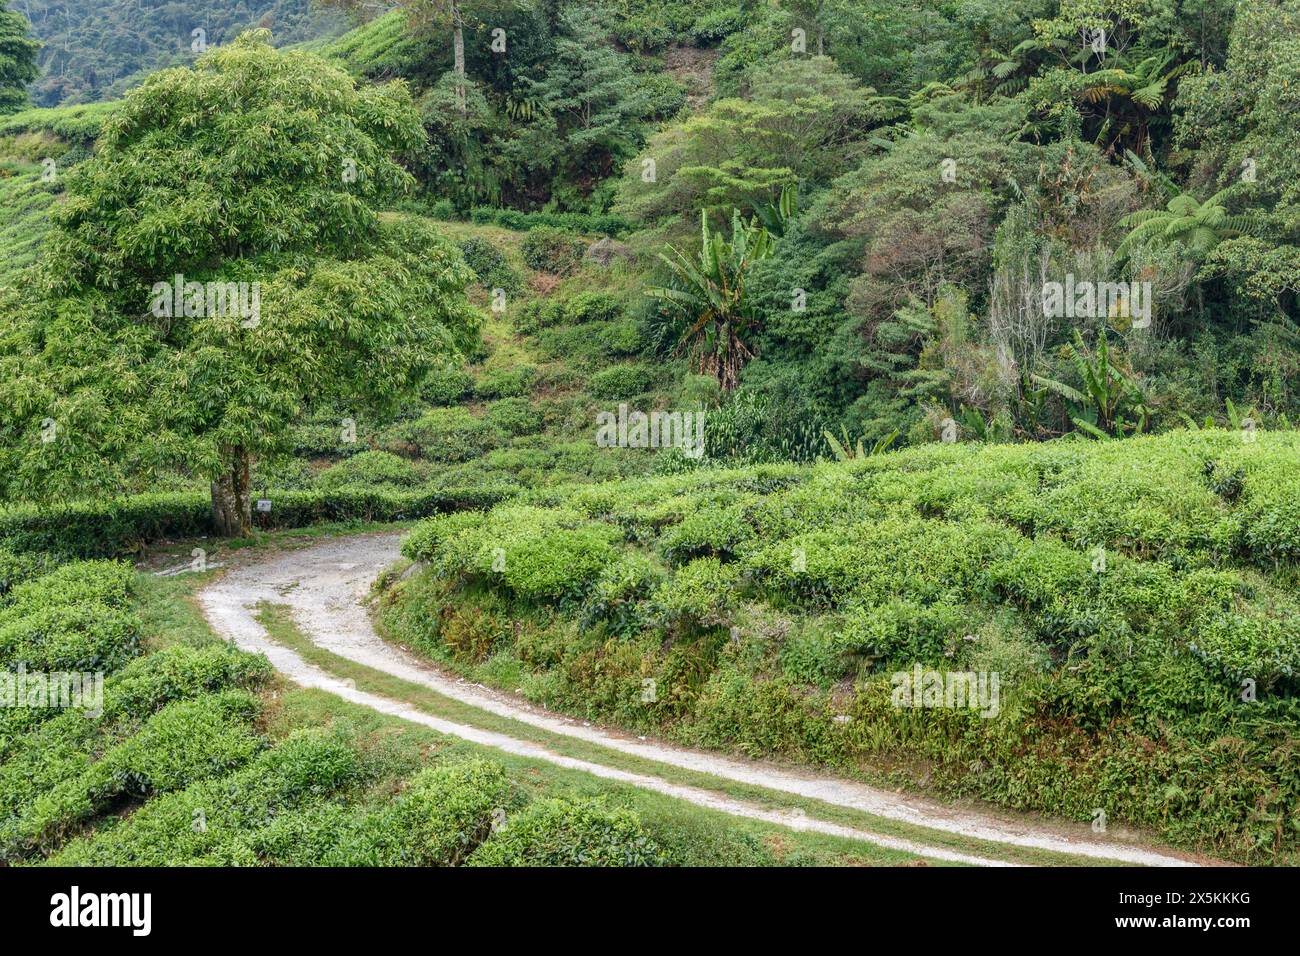 The Cameron Highlands, mountains and tea plantations, view over the rolling terrain with lush green foliage. Stock Photo